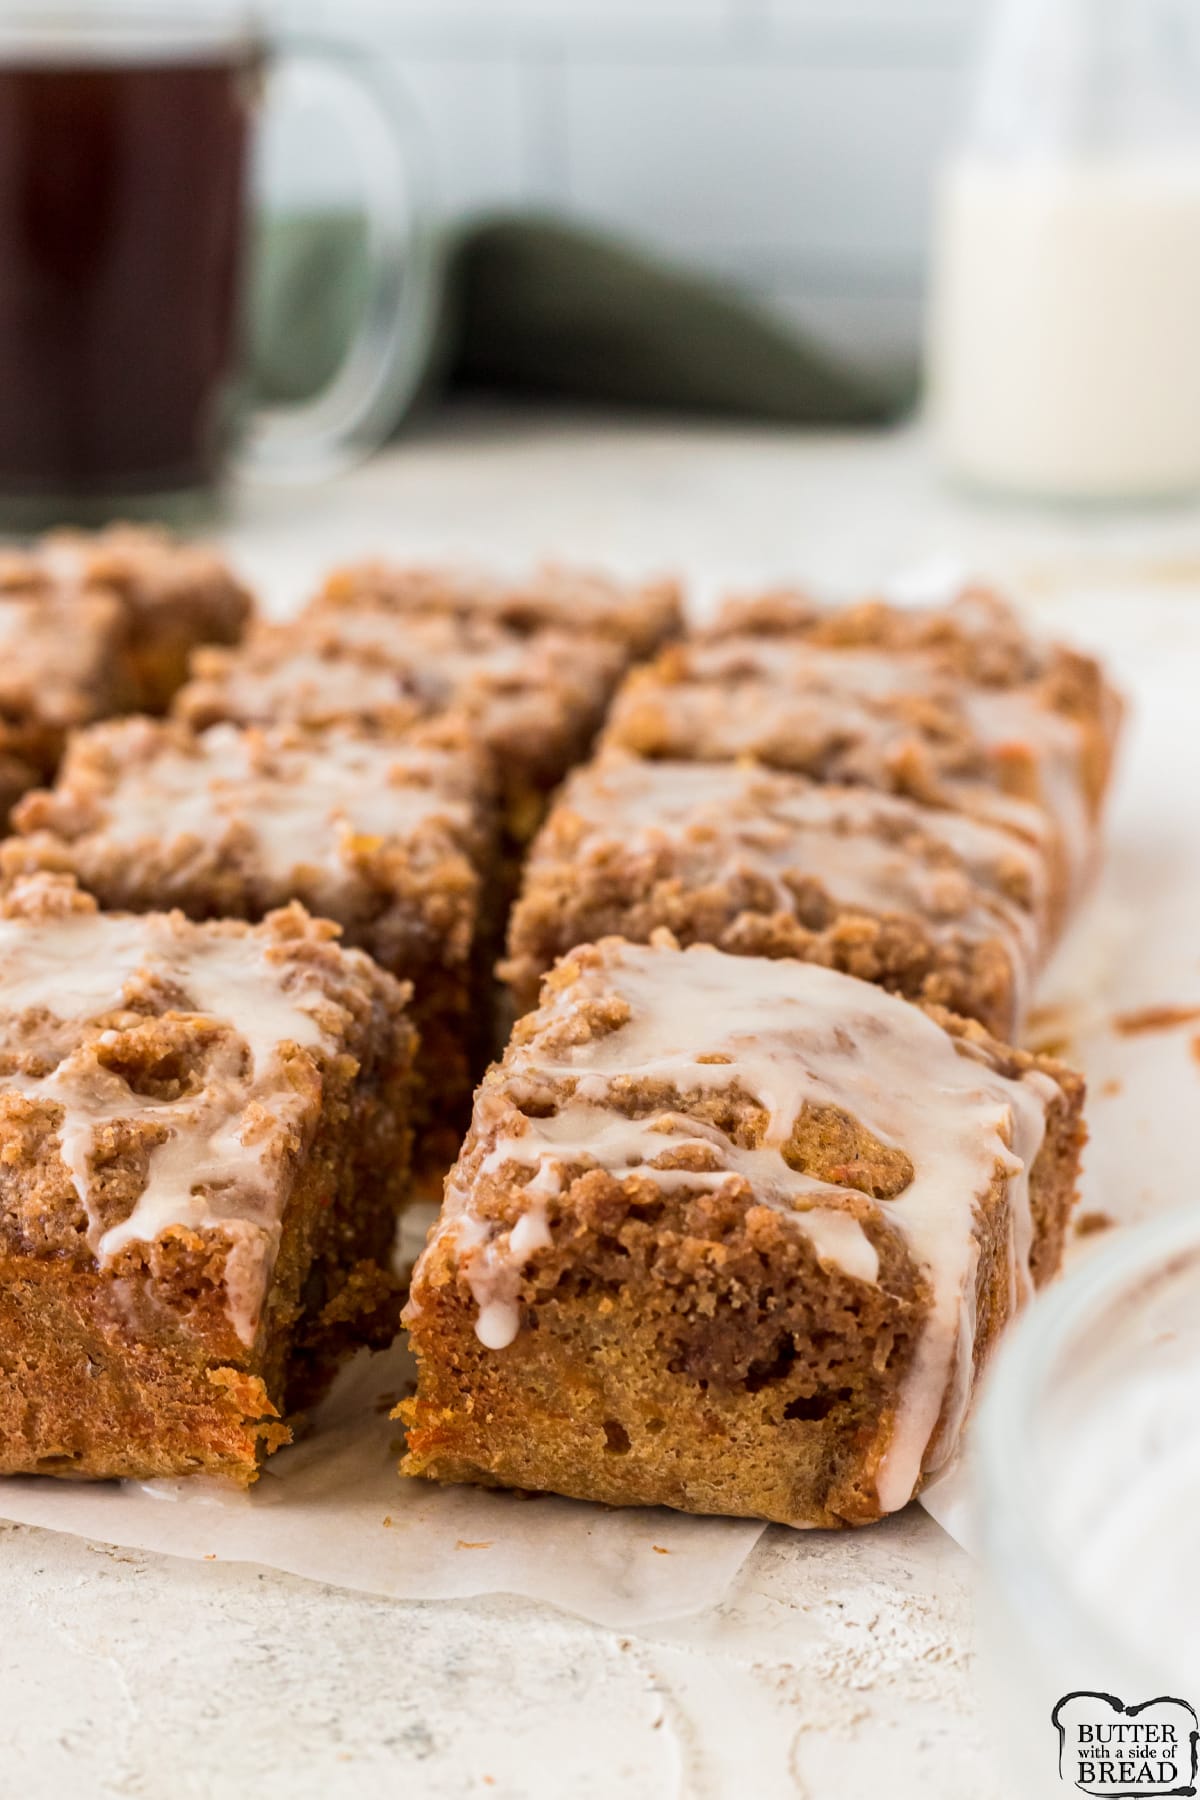 Carrot Cake Coffee Cake is a delicious way to enjoy breakfast! This soft, moist coffee cake recipe is loaded with shredded carrots, chopped walnuts and then topped with a crumbly topping and a simple powdered sugar glaze. 